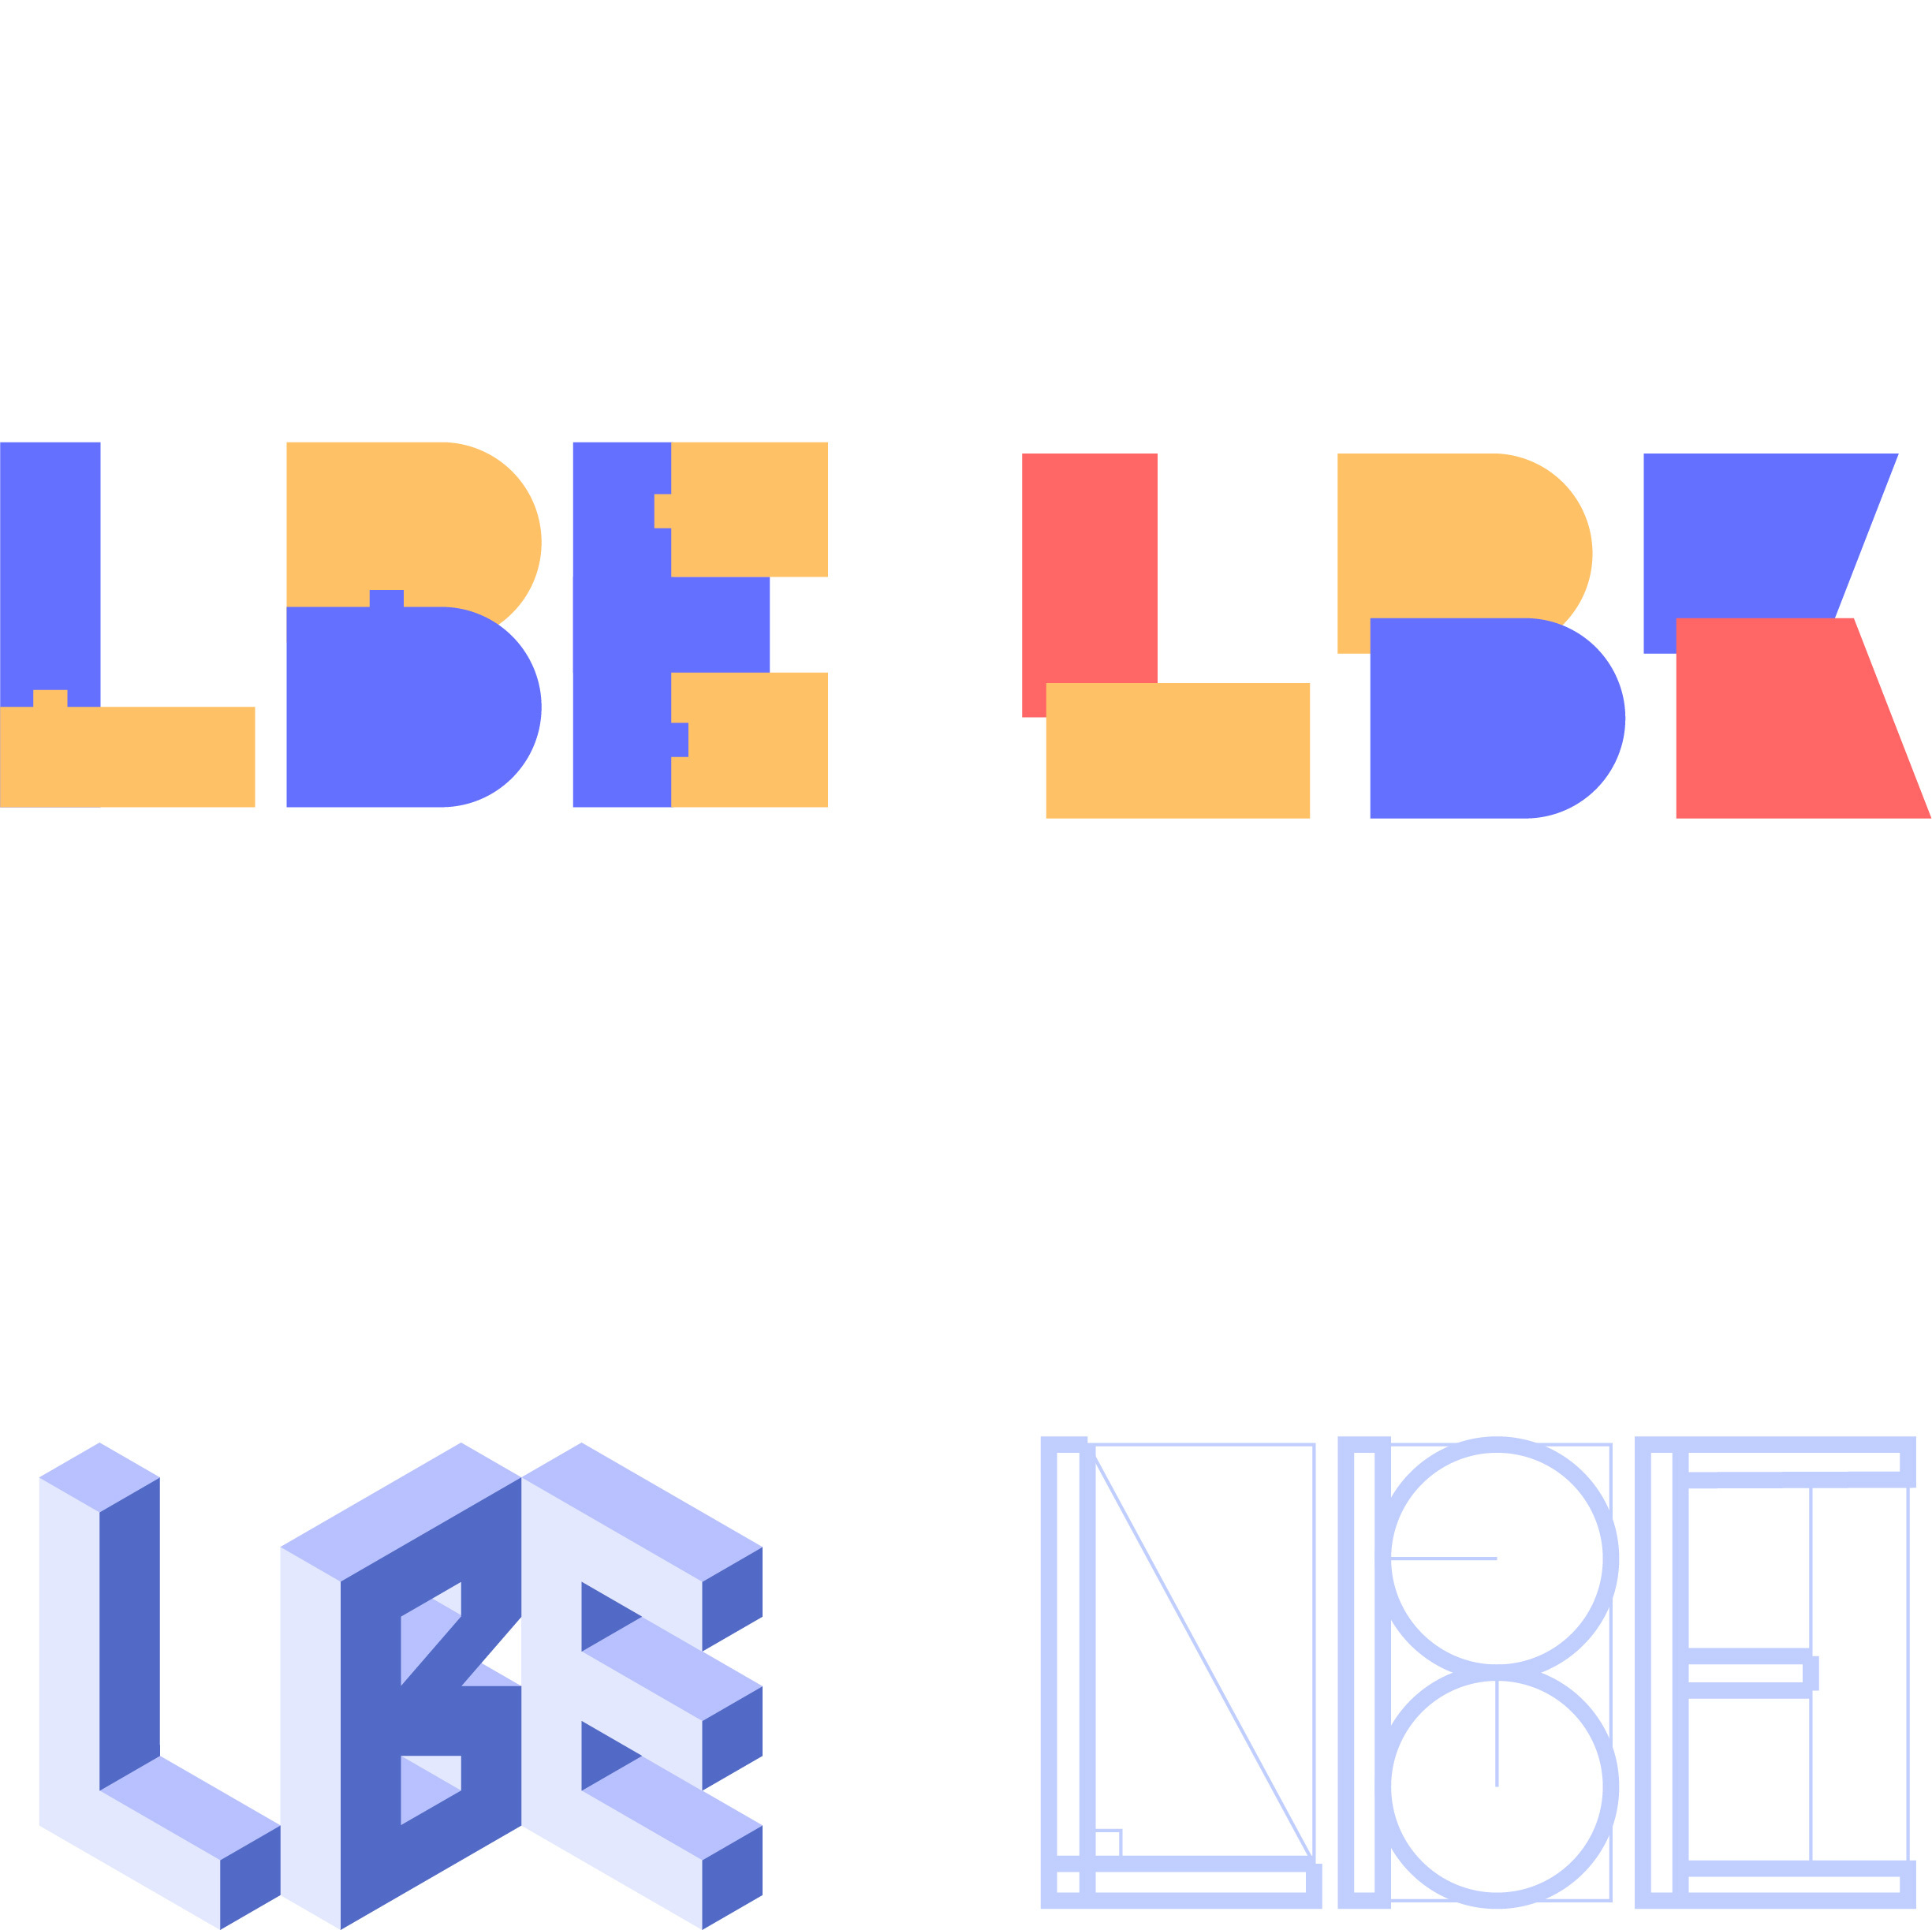 Four different LBE logo concepts.